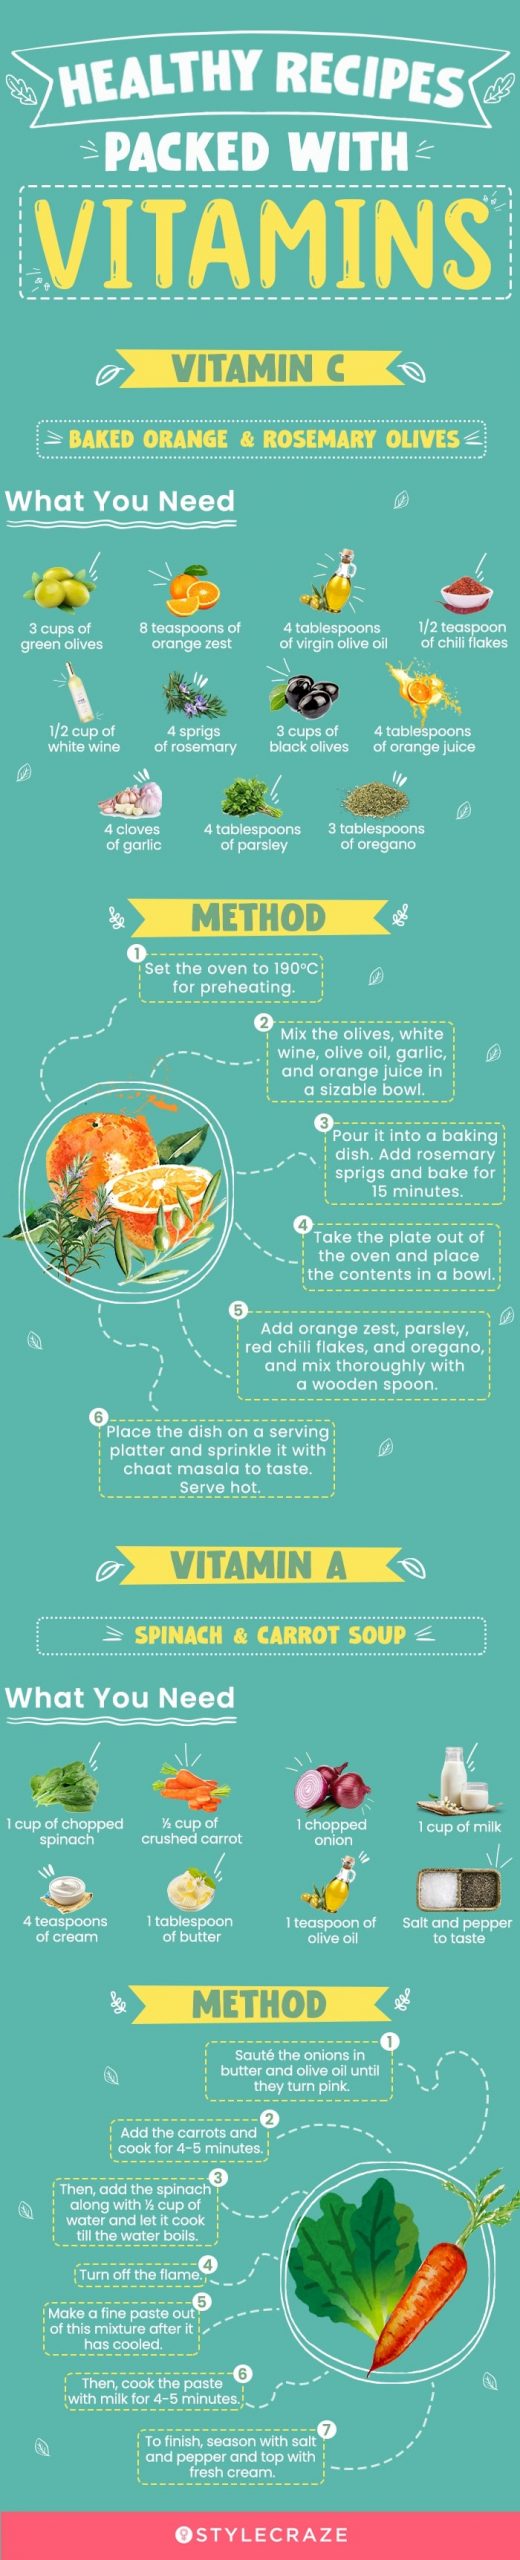 healthy recipes packed with vitamins [infographic]